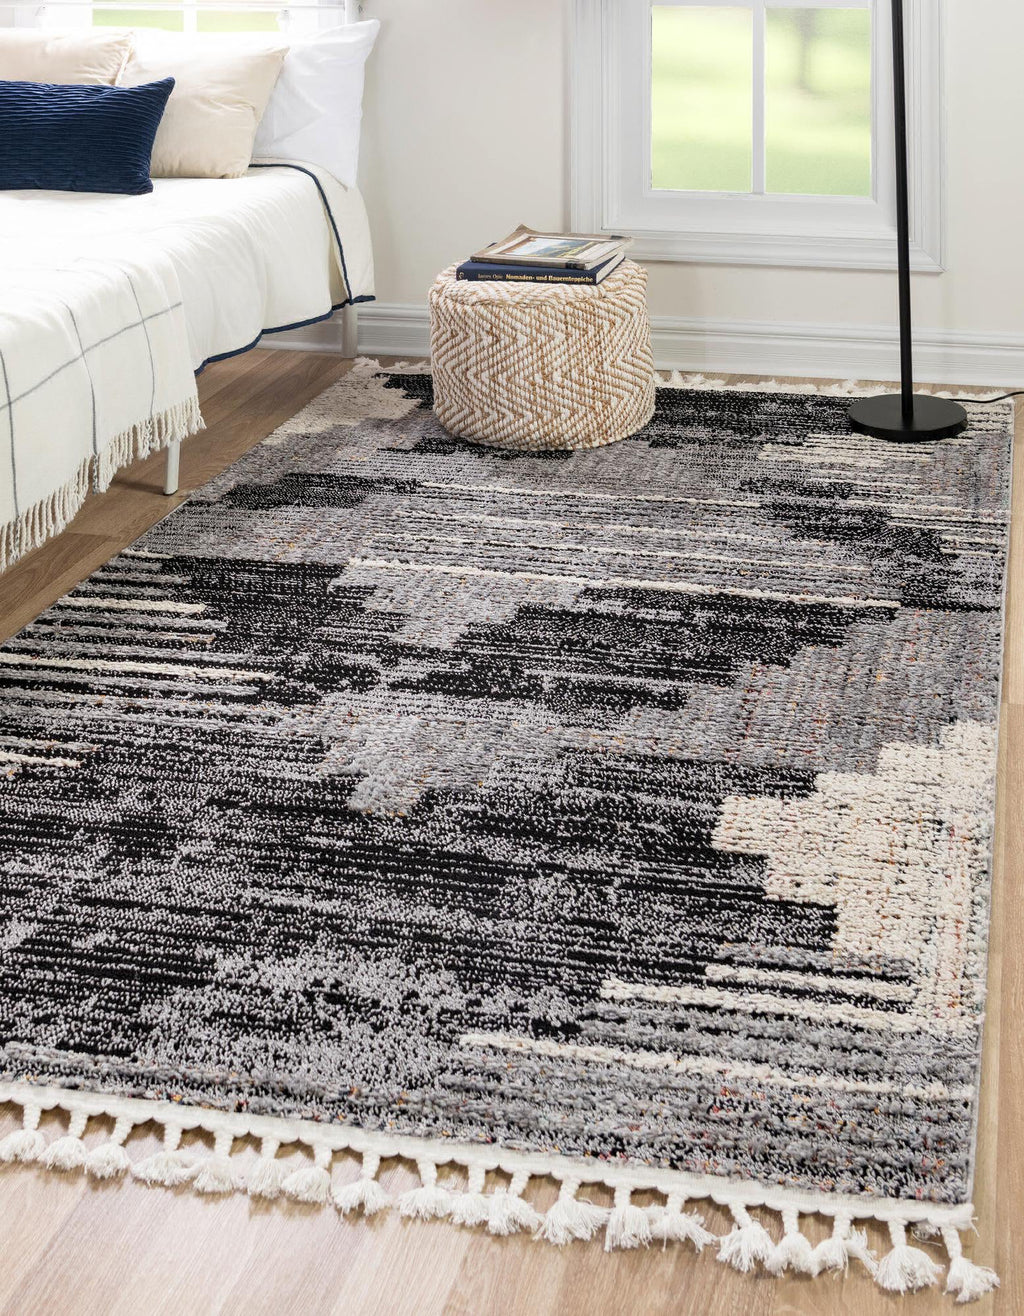 Unique Loom Cherokee T-CHRK4 Fossil Gray Area Rug Rectangle Lifestyle Image Feature